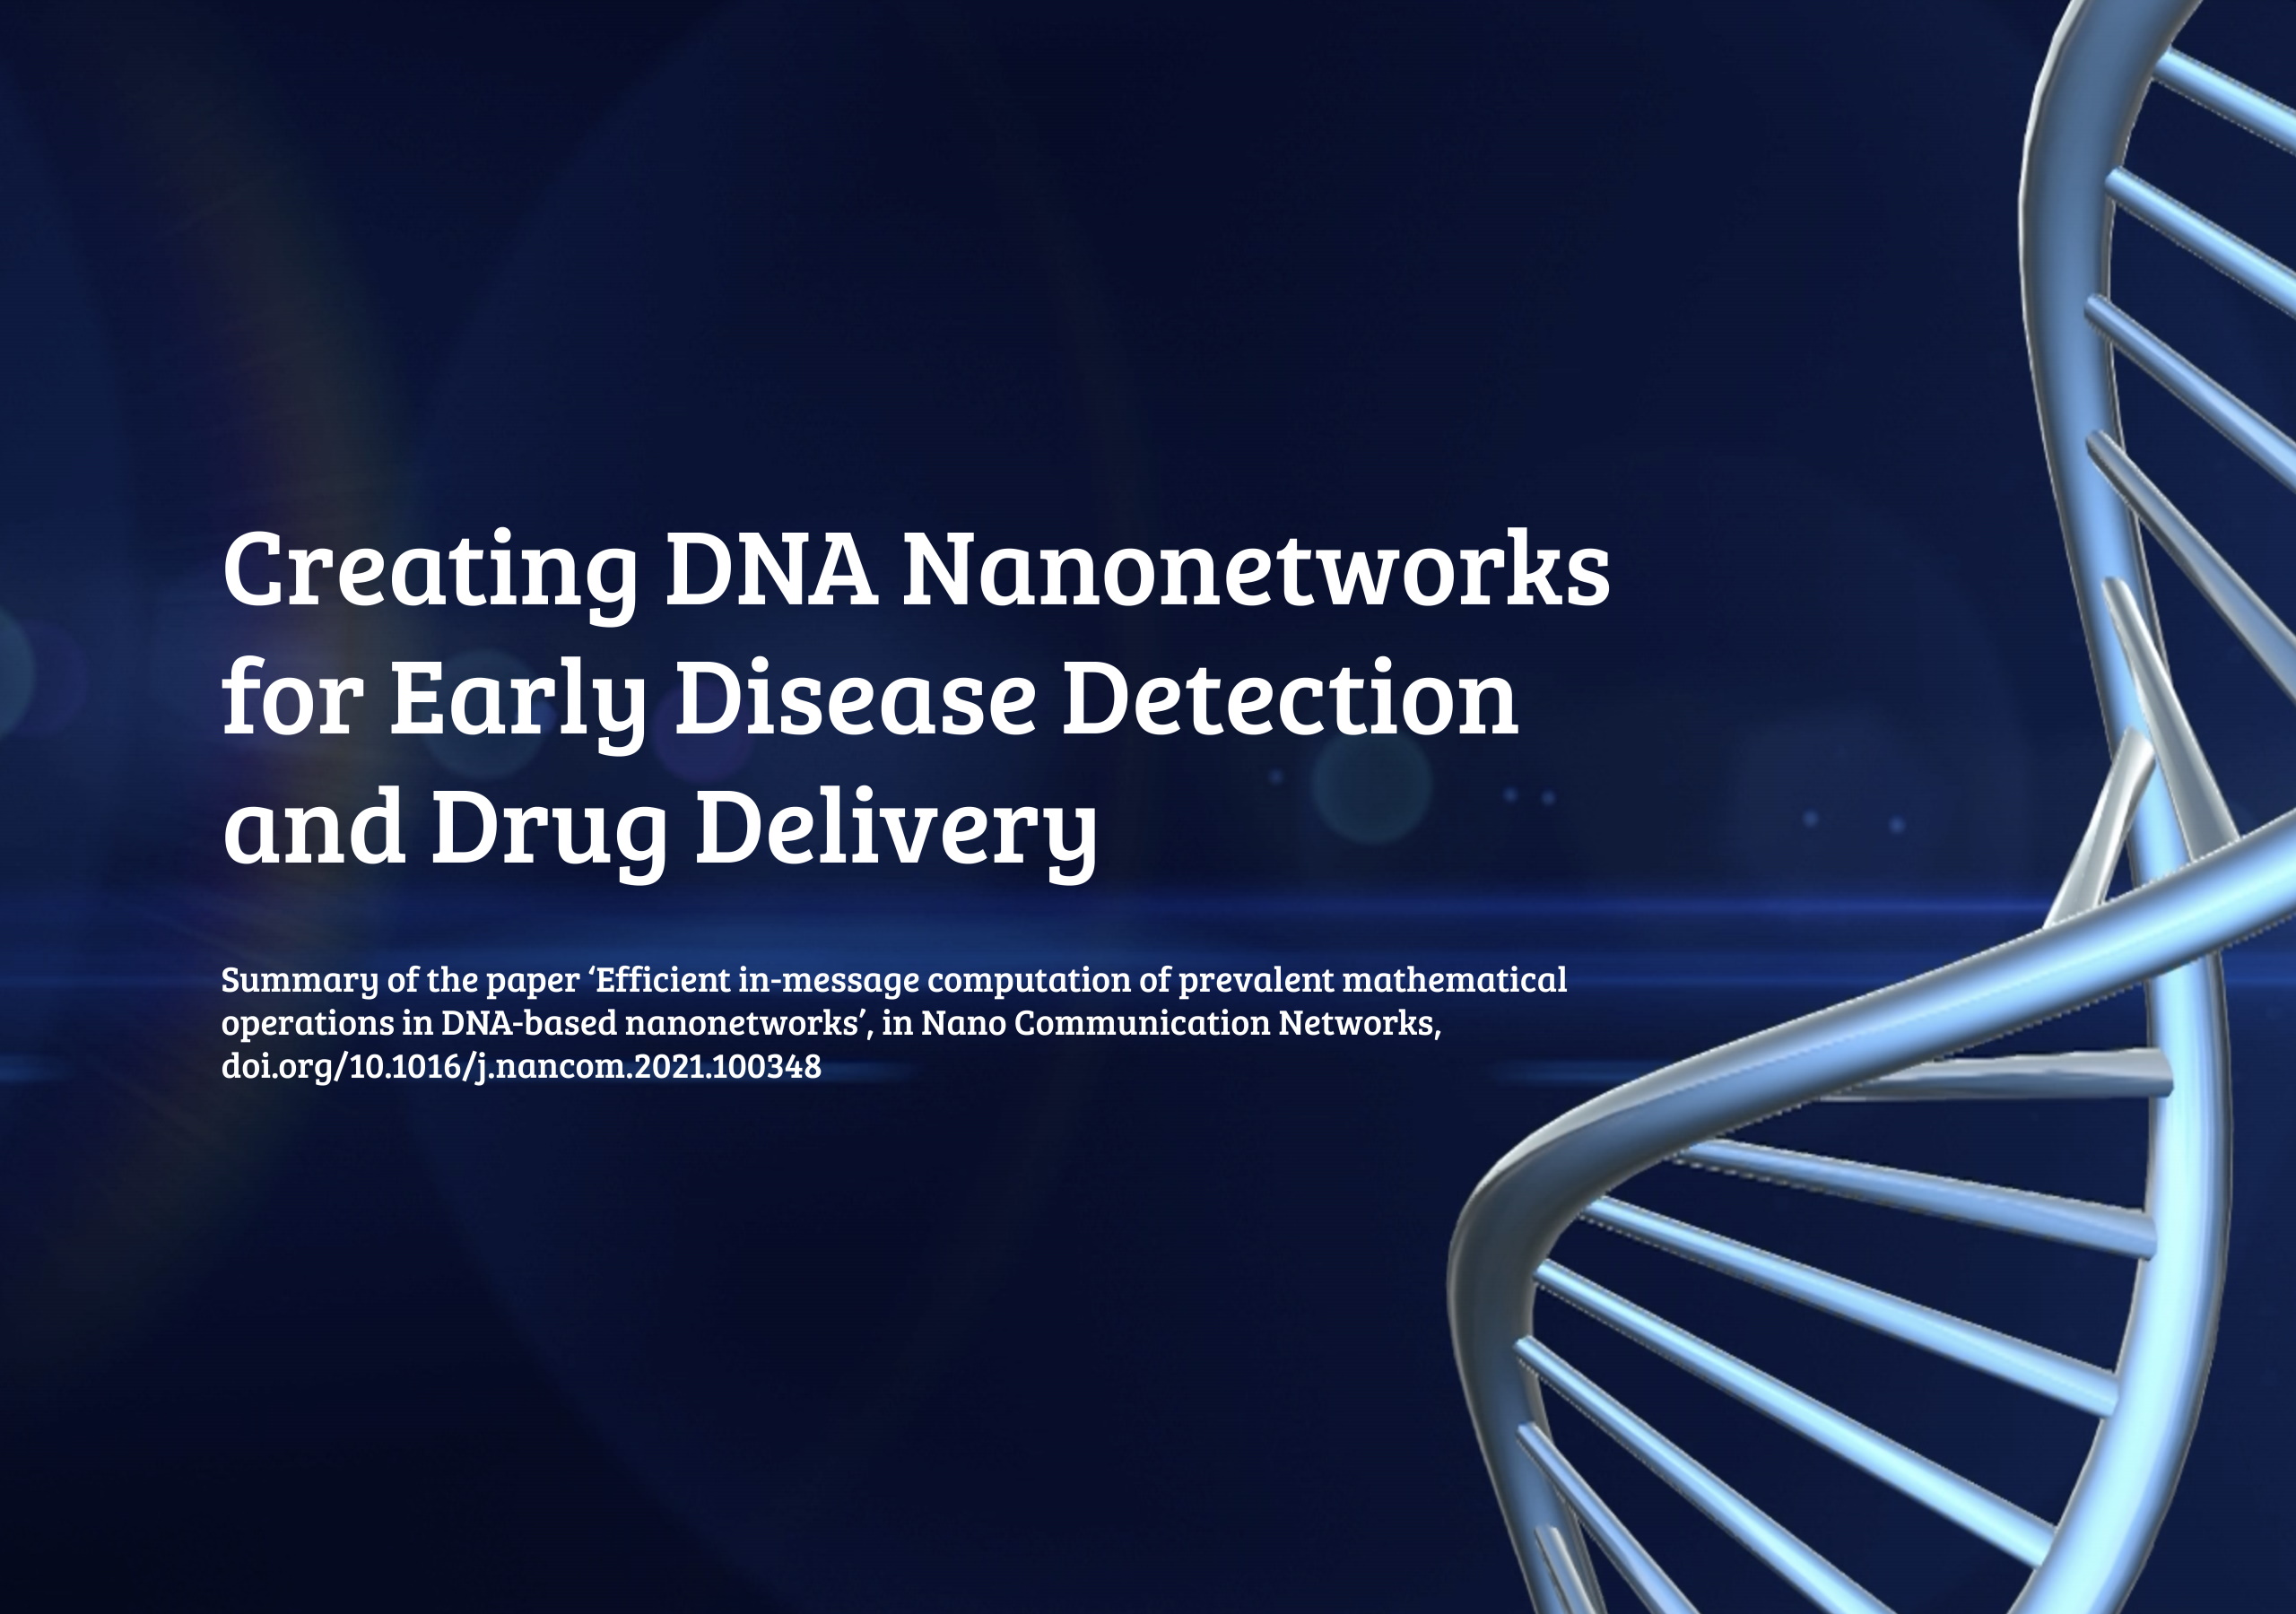 Dr Florian Lau | Creating DNA Nanonetworks for Early Disease Detection and Drug Delivery